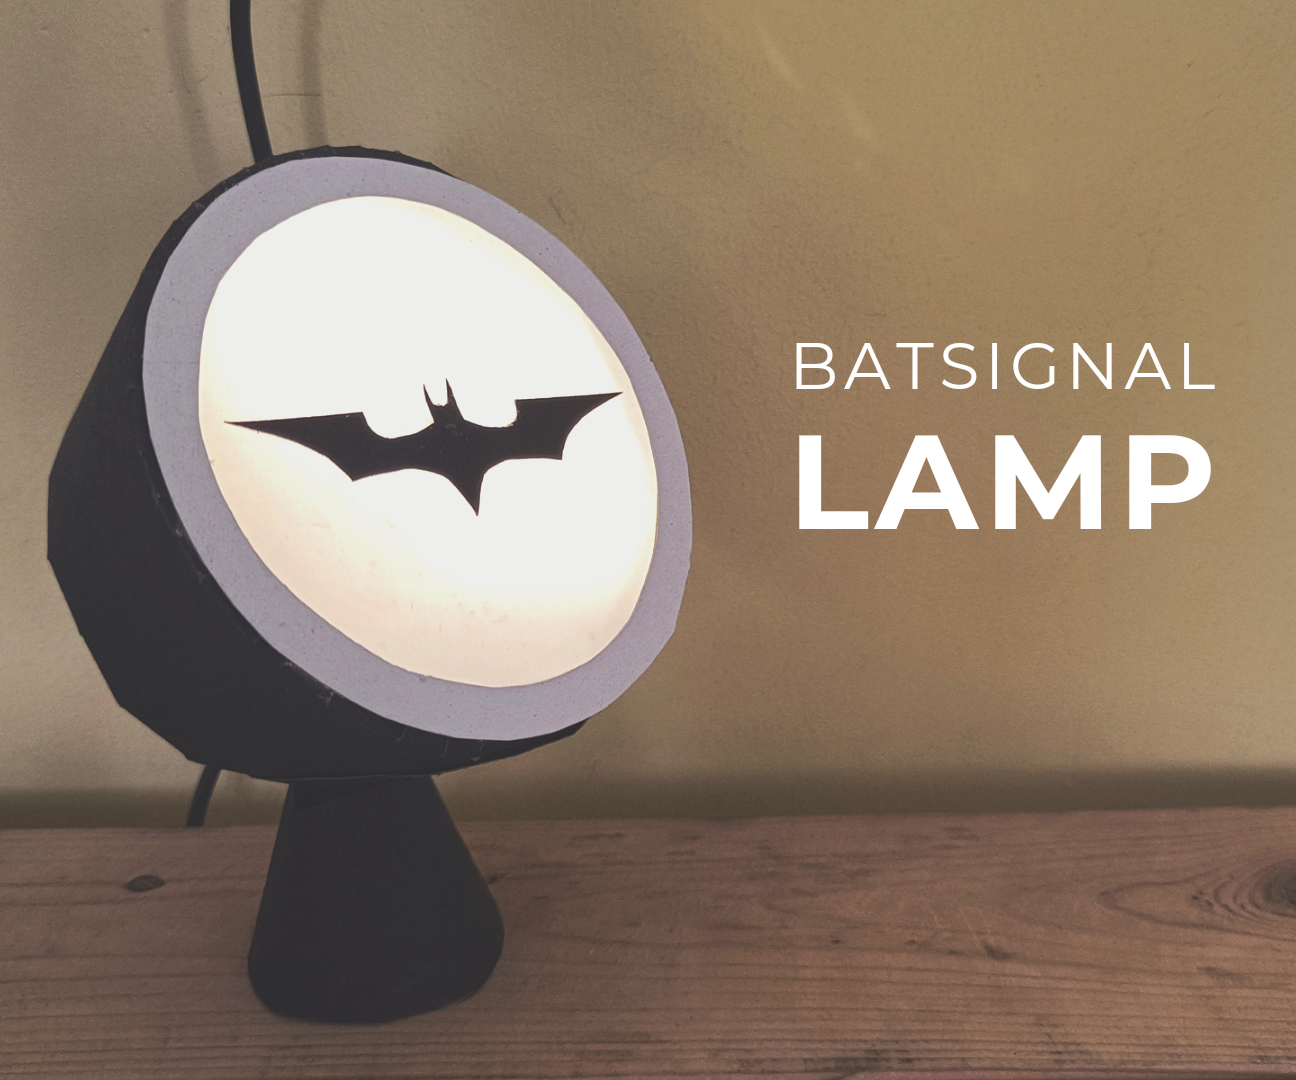 BatSignal - Lights up if you have missed calls or messages